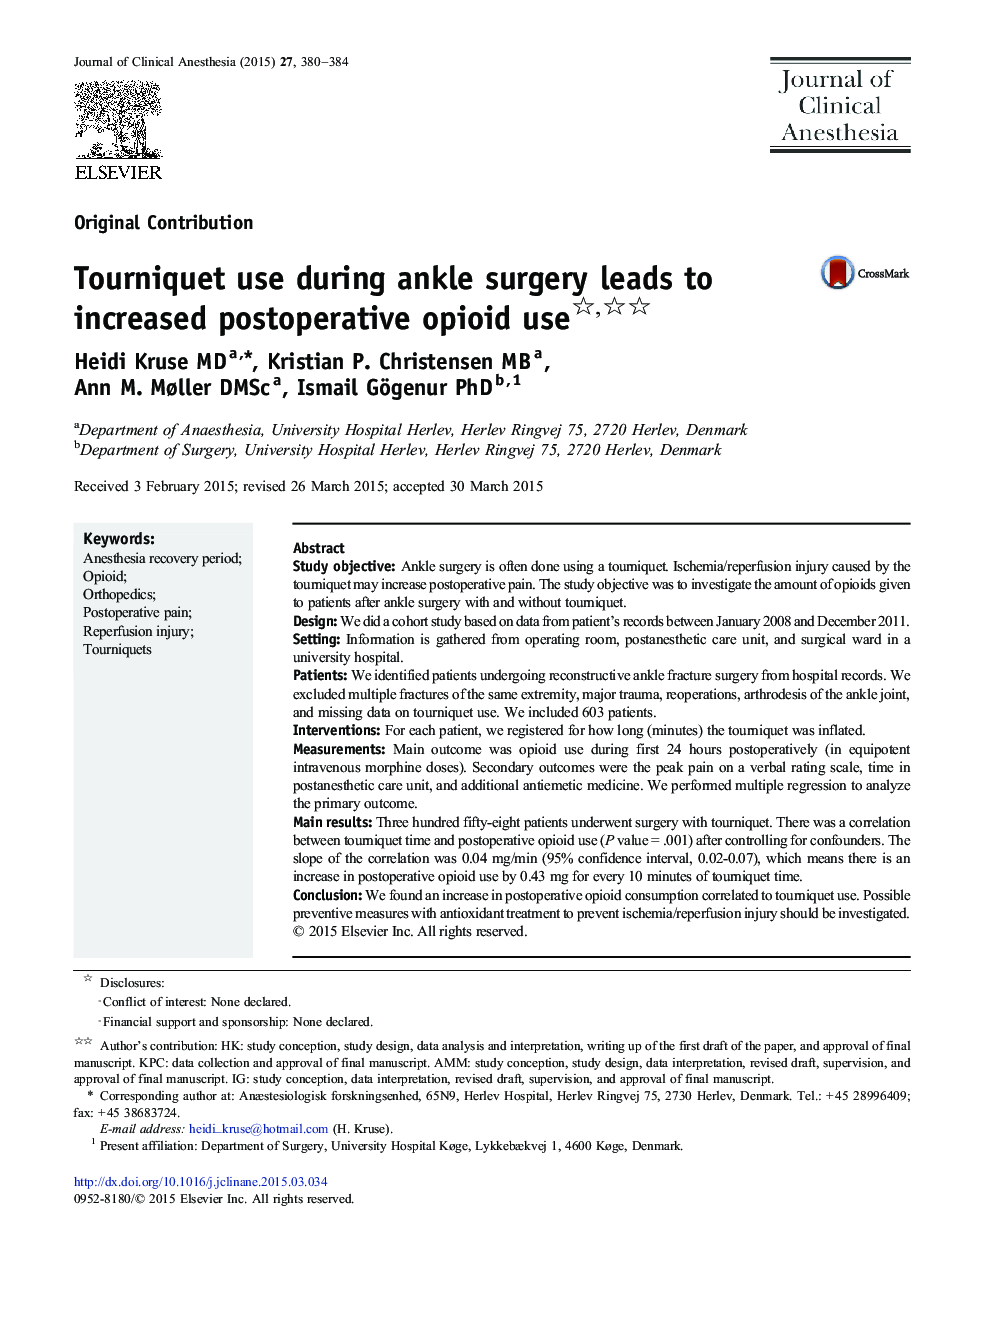 Tourniquet use during ankle surgery leads to increased postoperative opioid use